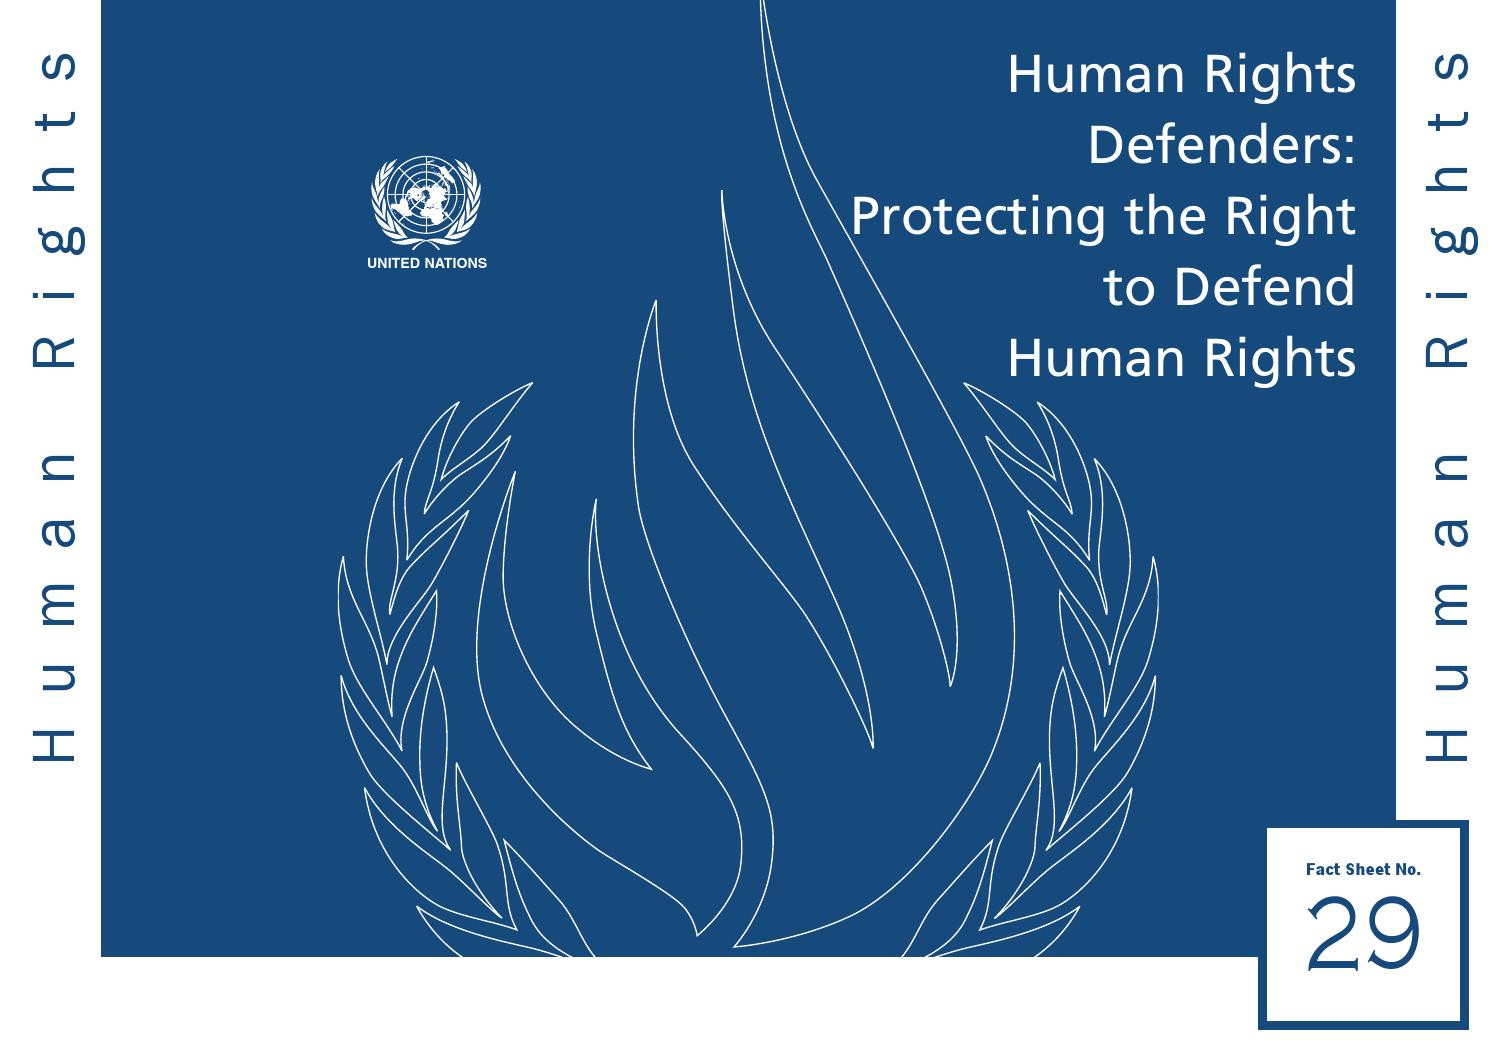  VIDEO: The UN and providing political protection to human rights defenders